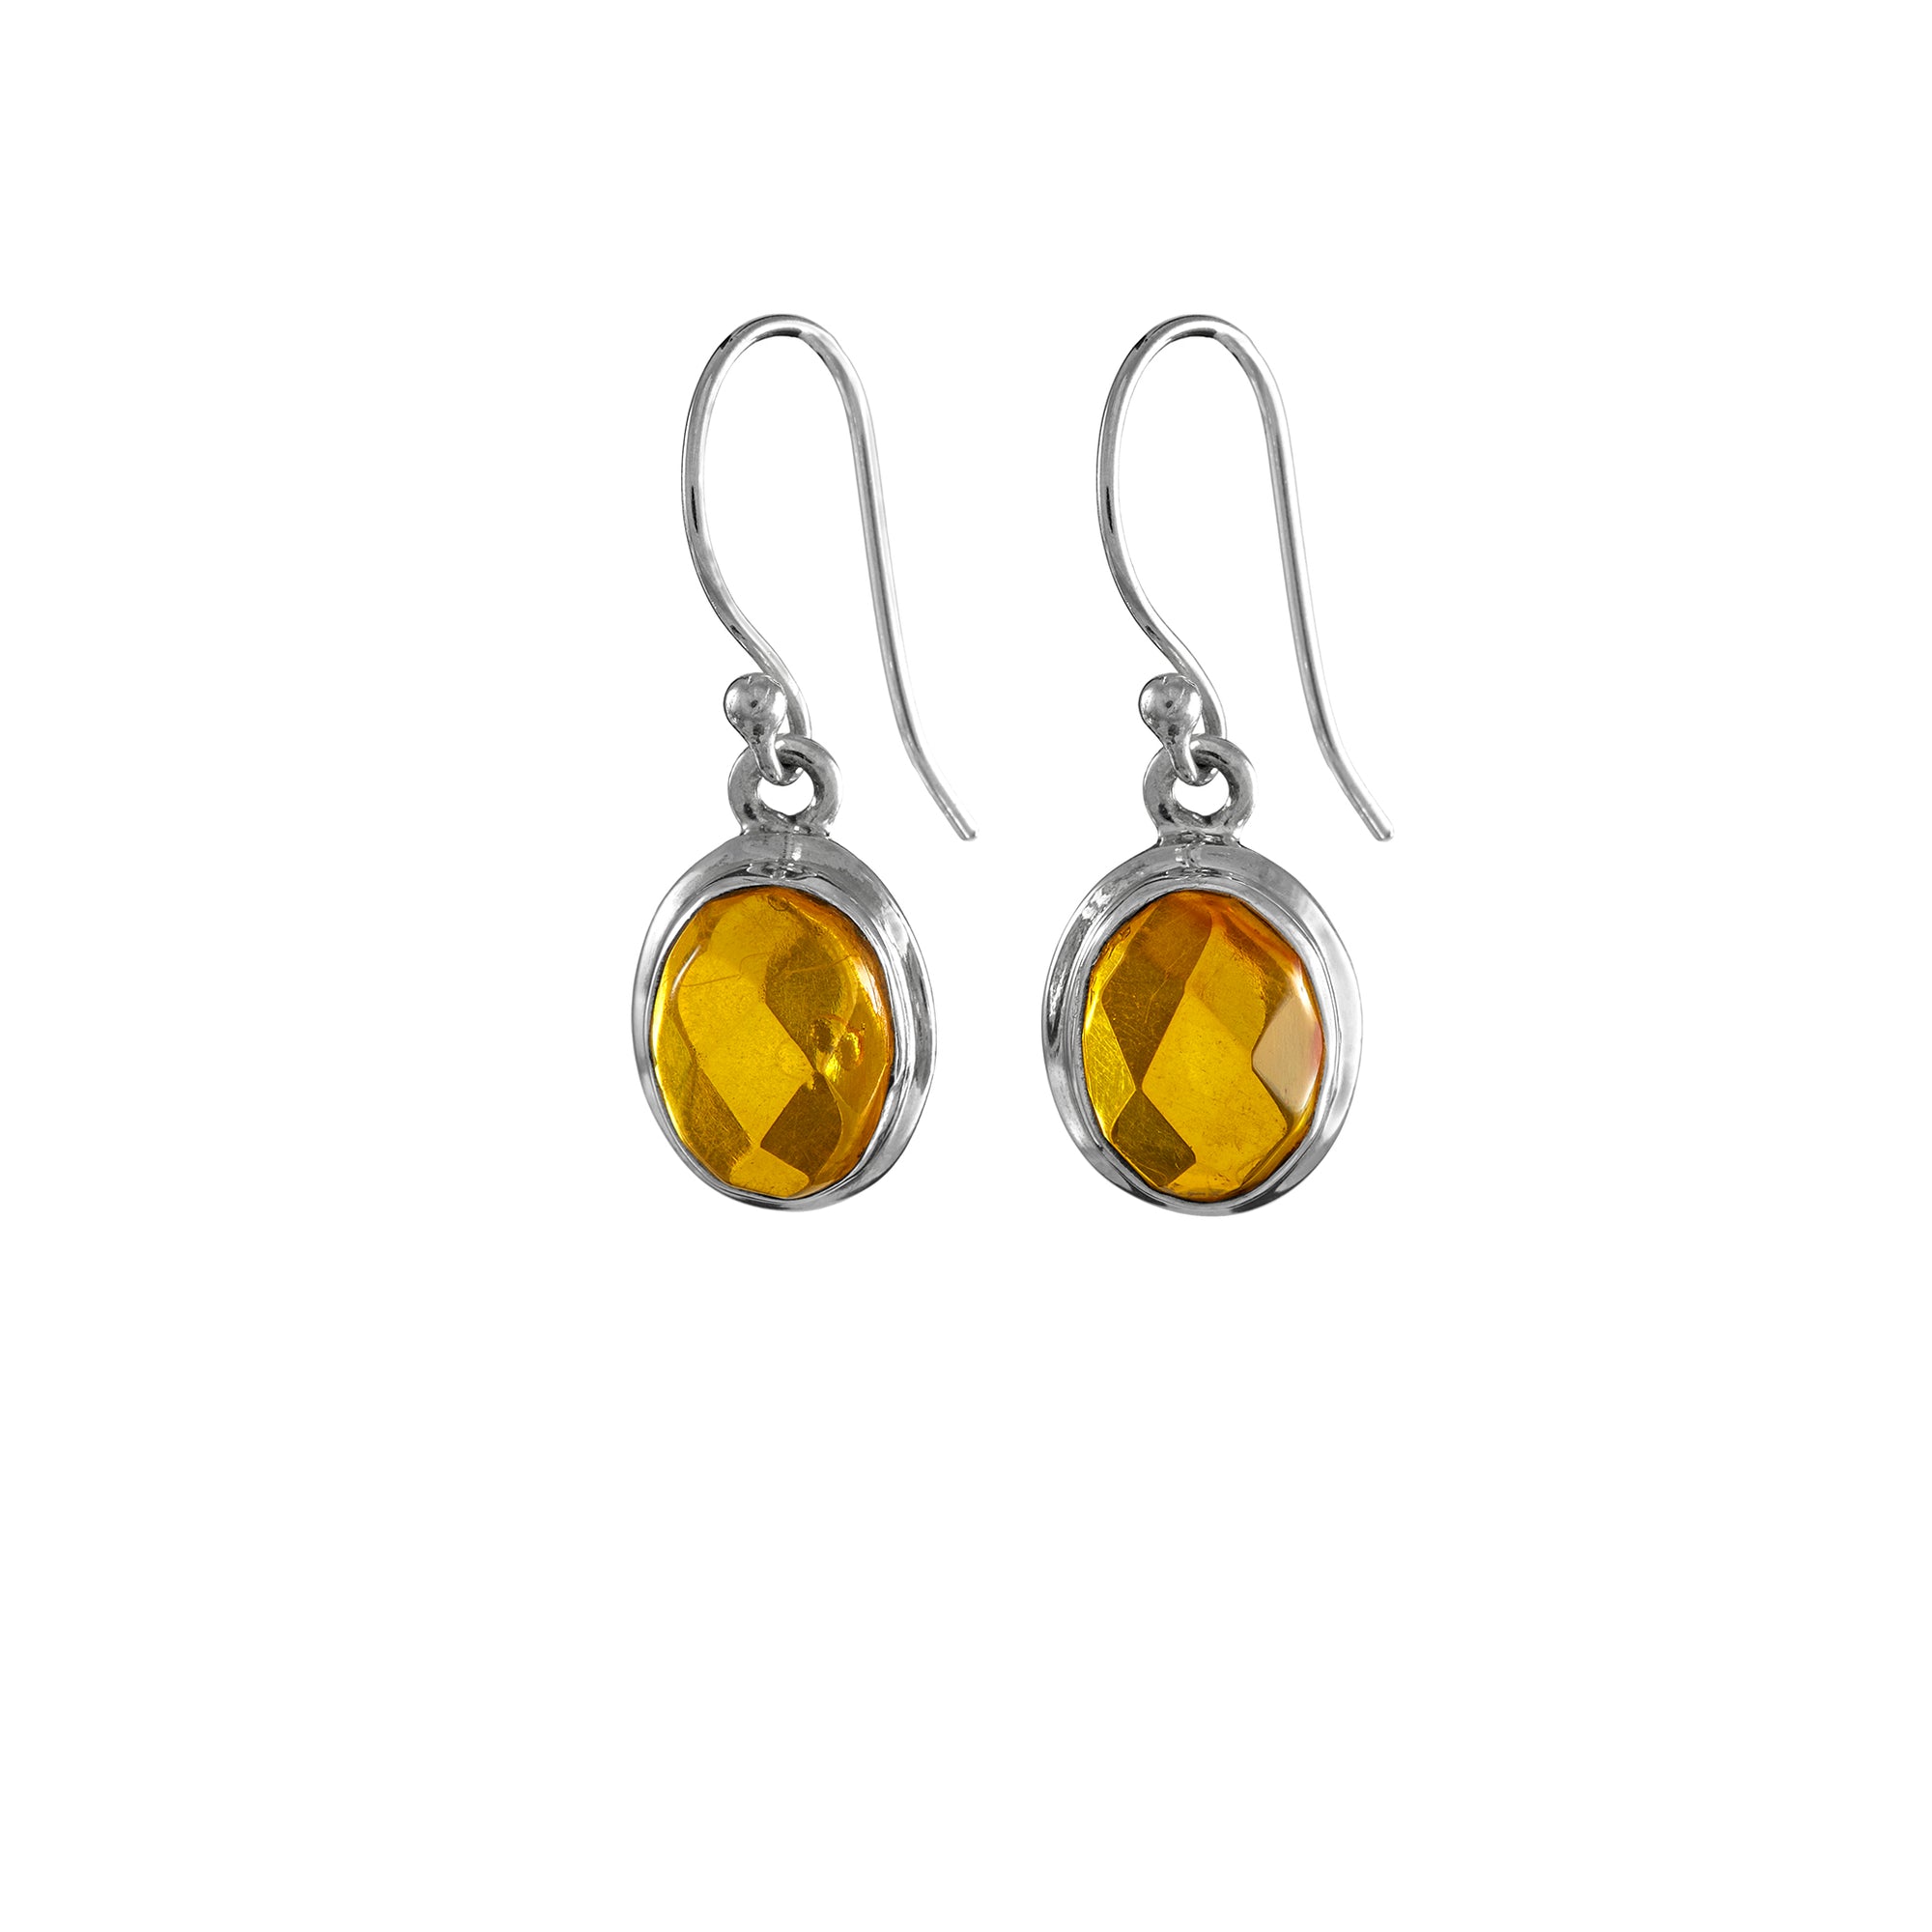 Facetted amber earrings